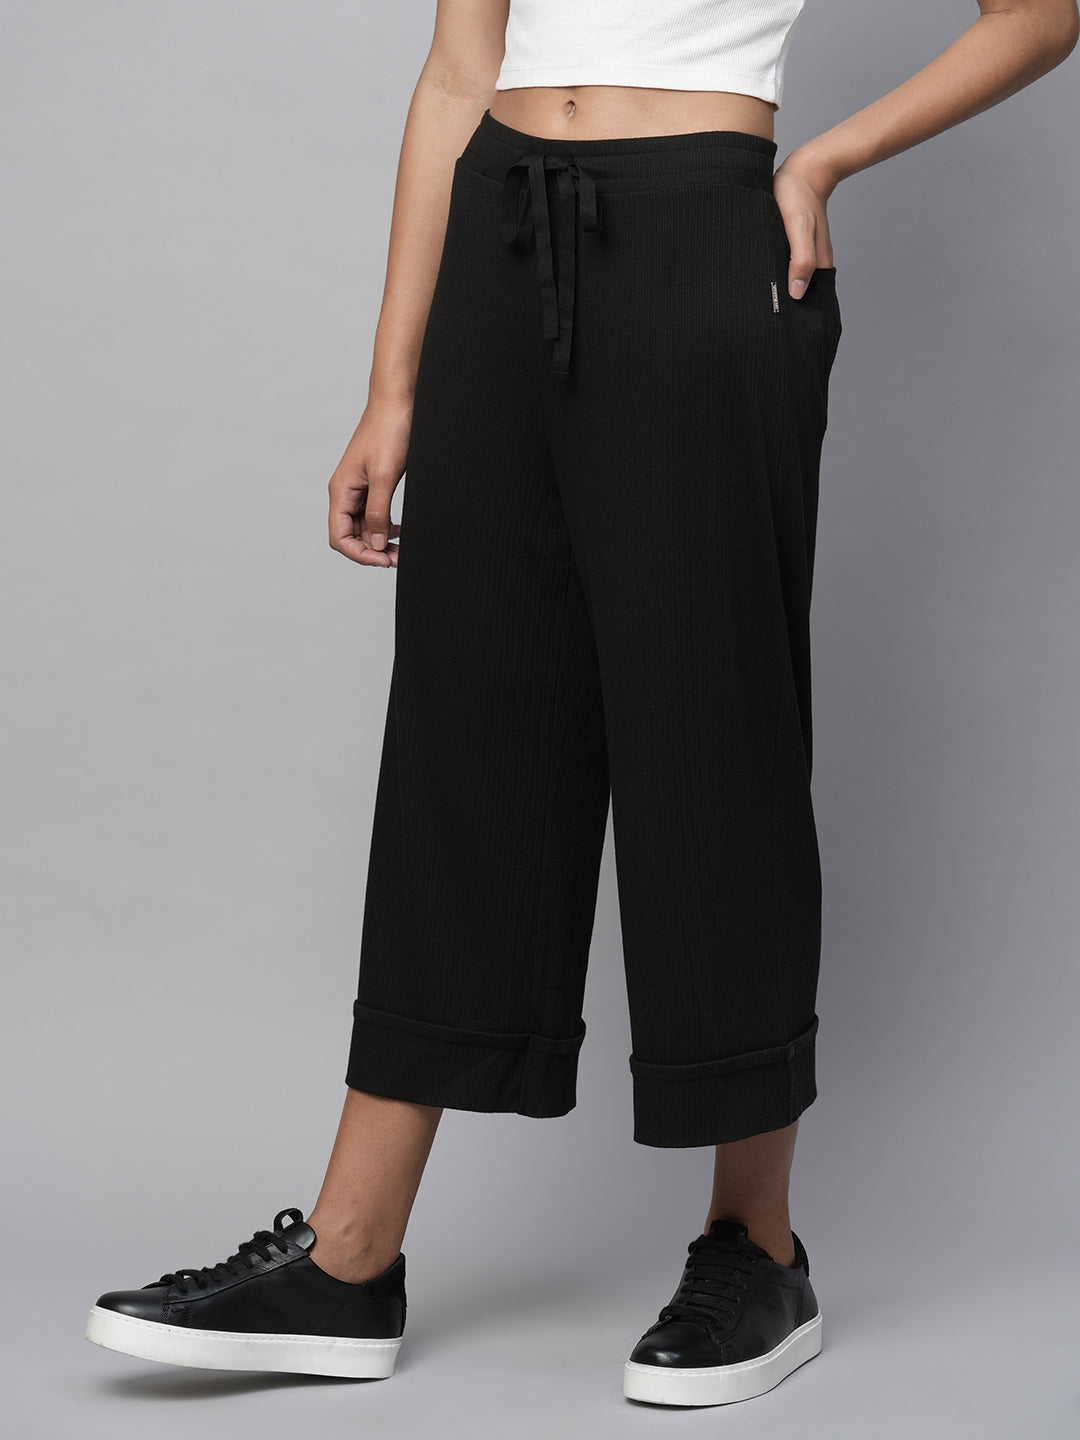 Ribbed Knit Wide Leg Cropped Lounge Pants With A Cuffed Hemline